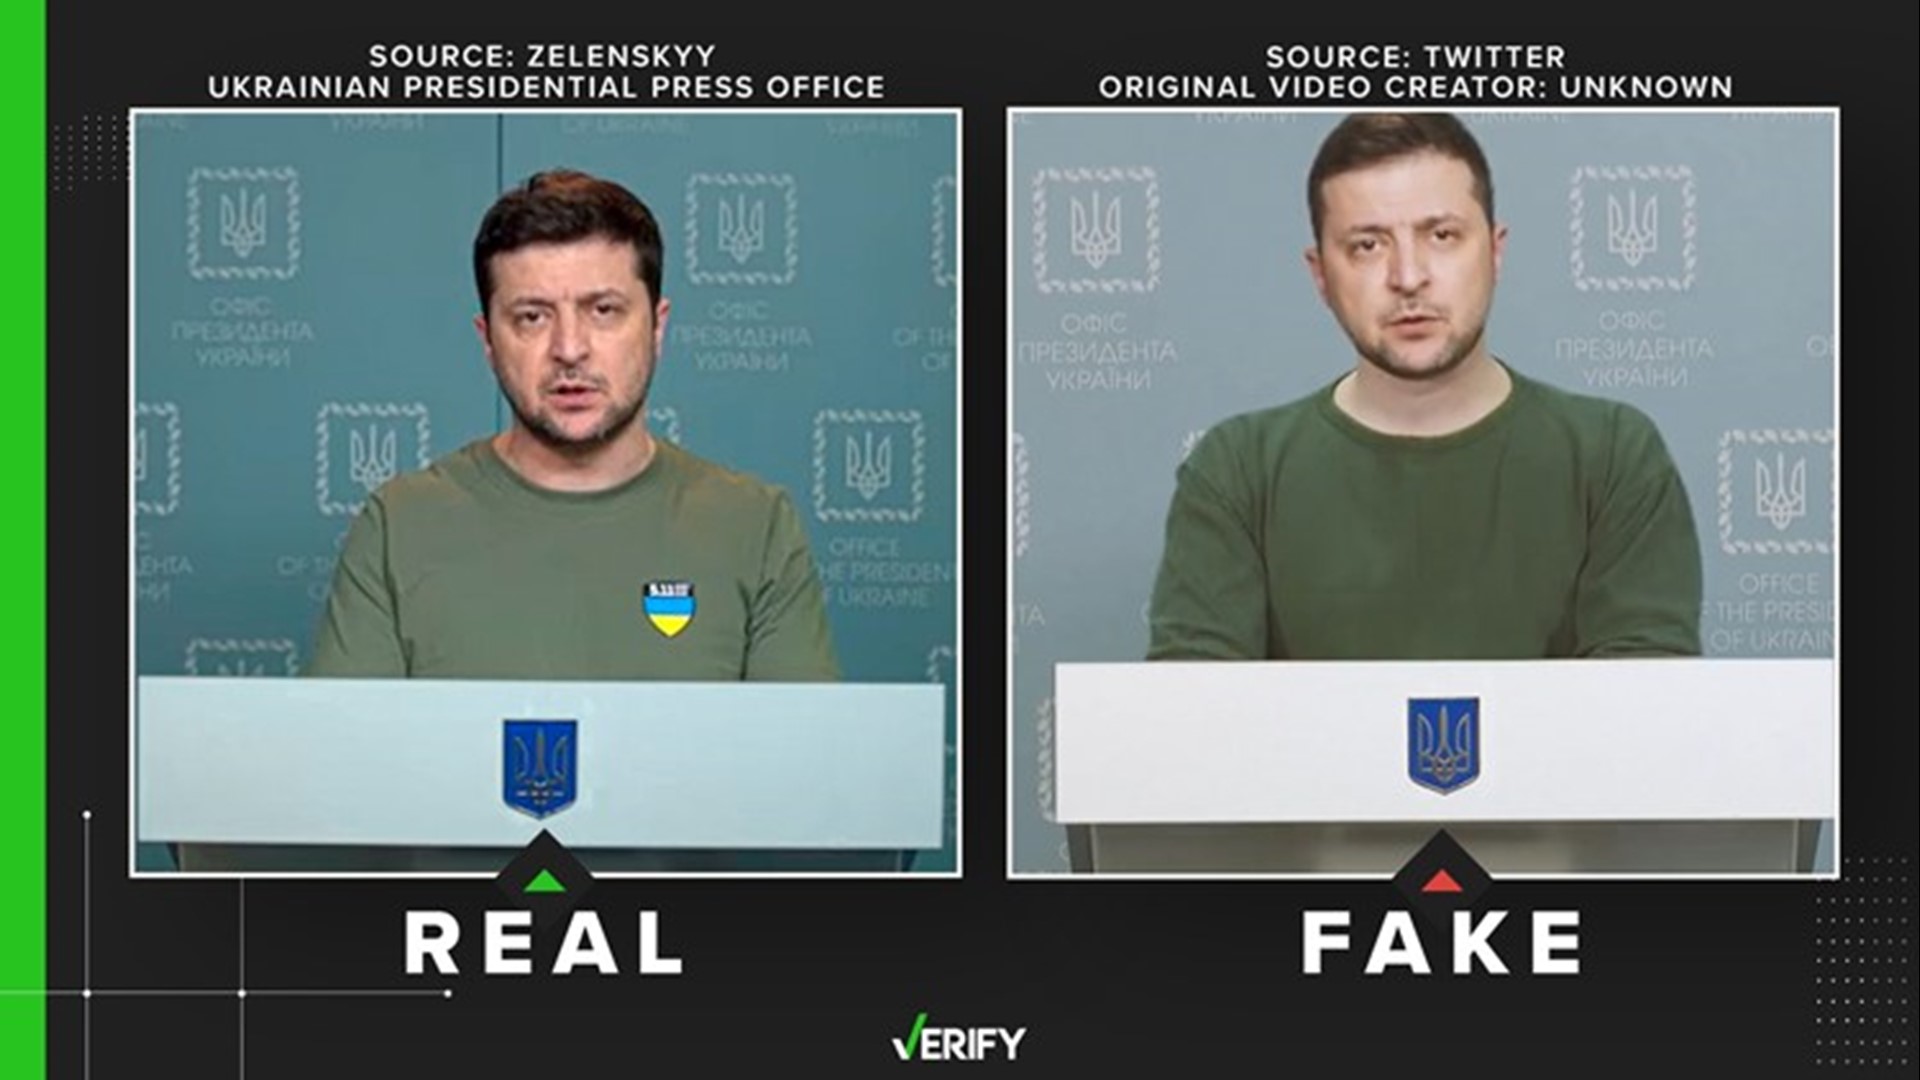 The VERIFY team confirmed a video of Ukraine President Zelenskyy telling his people to surrender is a deepfake. It was created using images from press conferences.